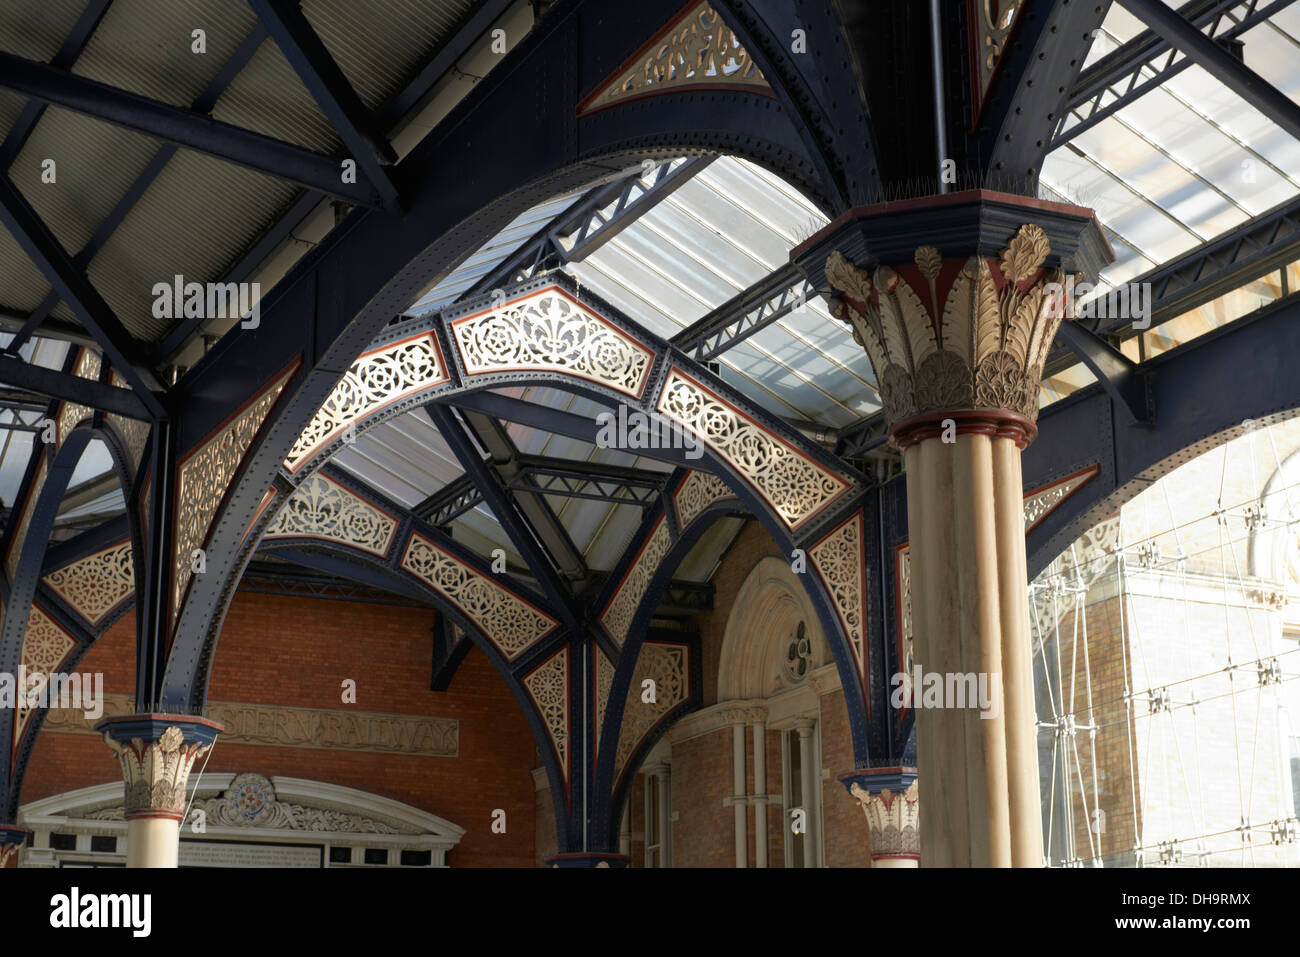 Architectural detail of the cast iron roof structure of London Liverpool Street station with light shining through the glazed roof of the Victorian Stock Photo